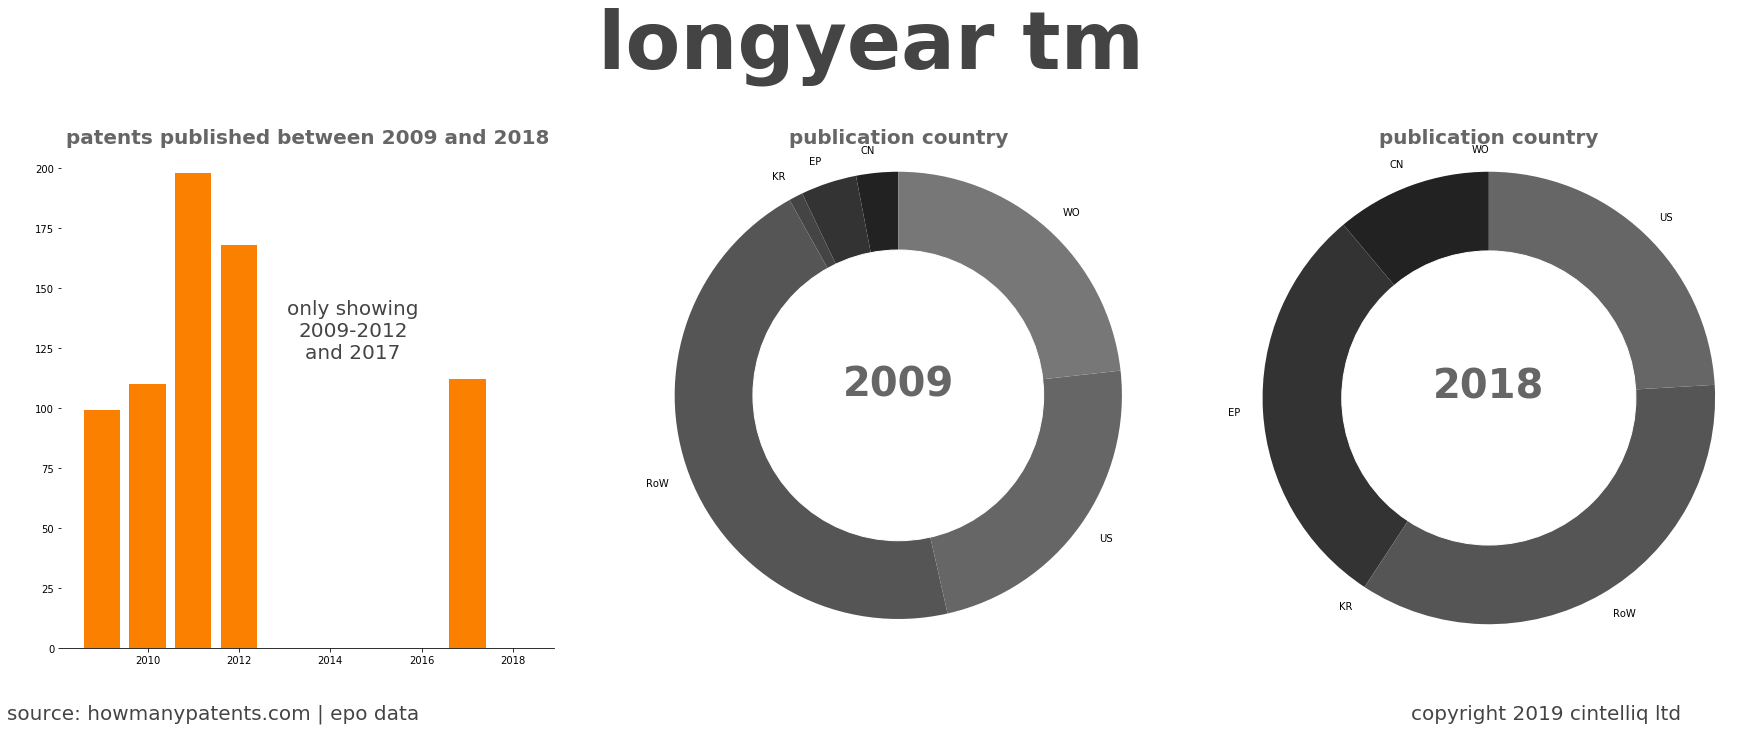 summary of patents for Longyear Tm